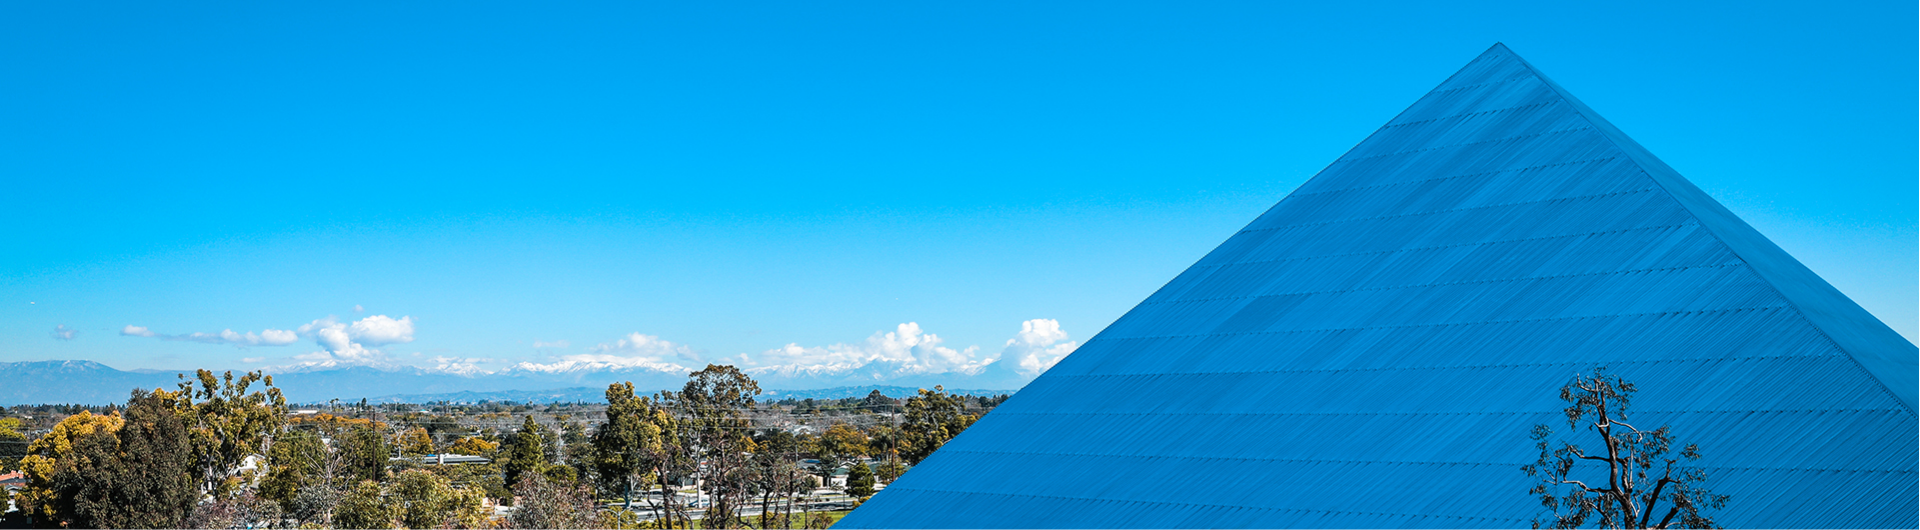 CSU Long Beach blue pyramid with trees and buildings in the distance